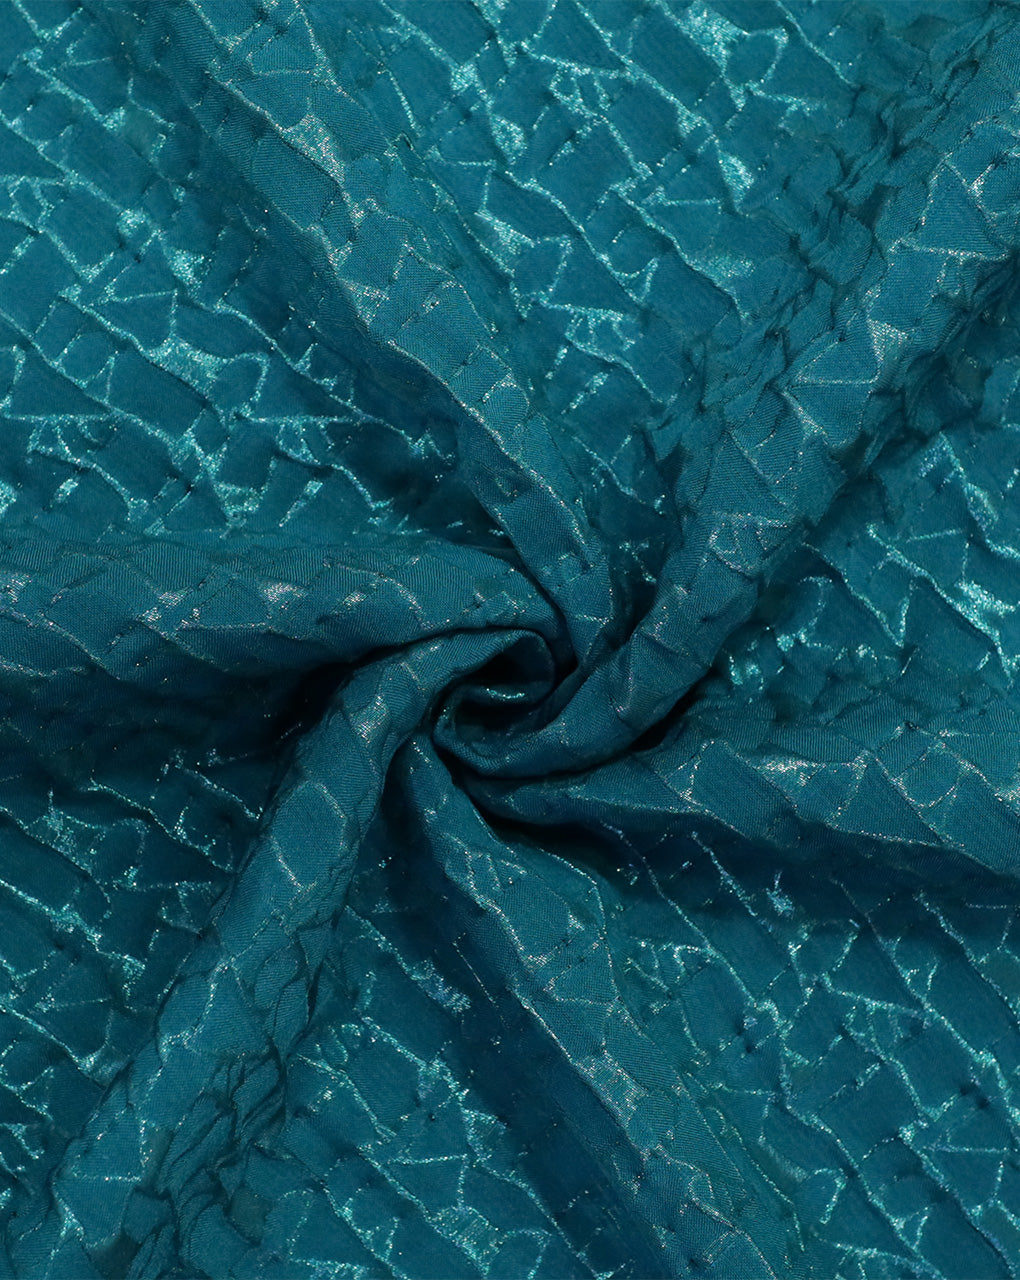 SEA GREEN POLYESTER EMBOSSED JACQUARD FABRIC